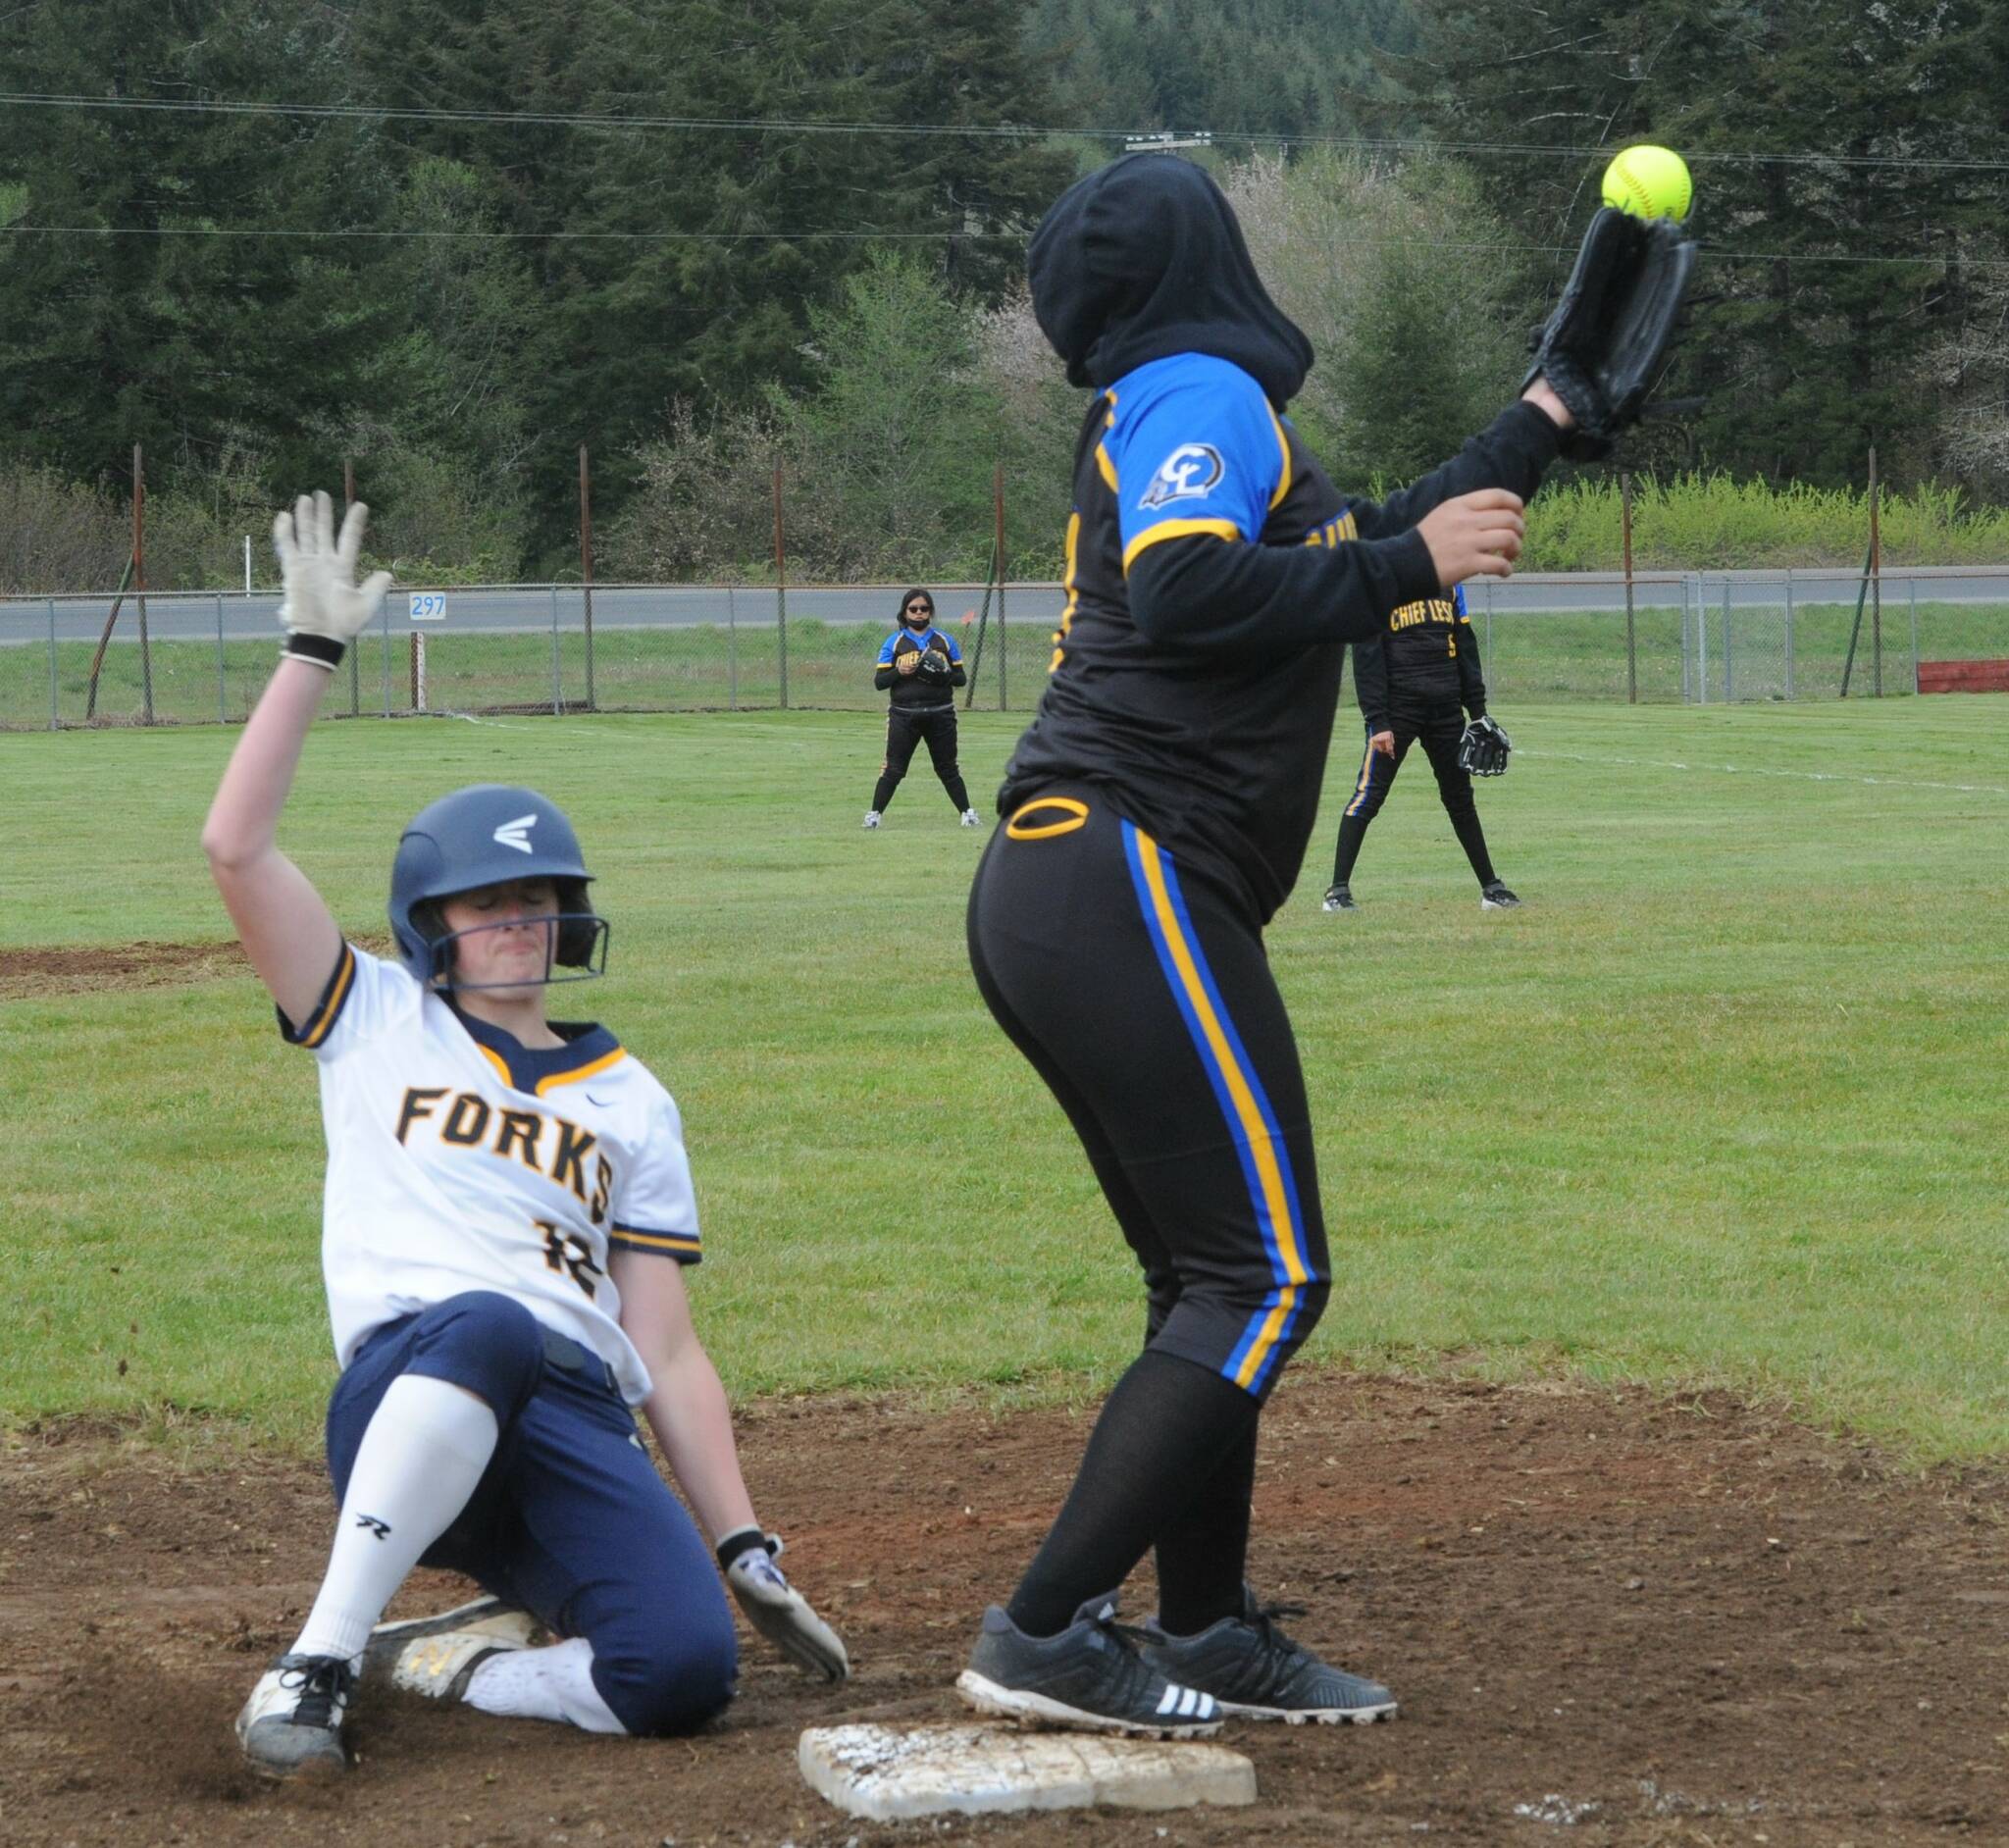 Forks’ Chloe Gayideski-St. John slid safely into third base against Chief Leschi in a doubleheader which turned into a rout in favor of the Spartans.